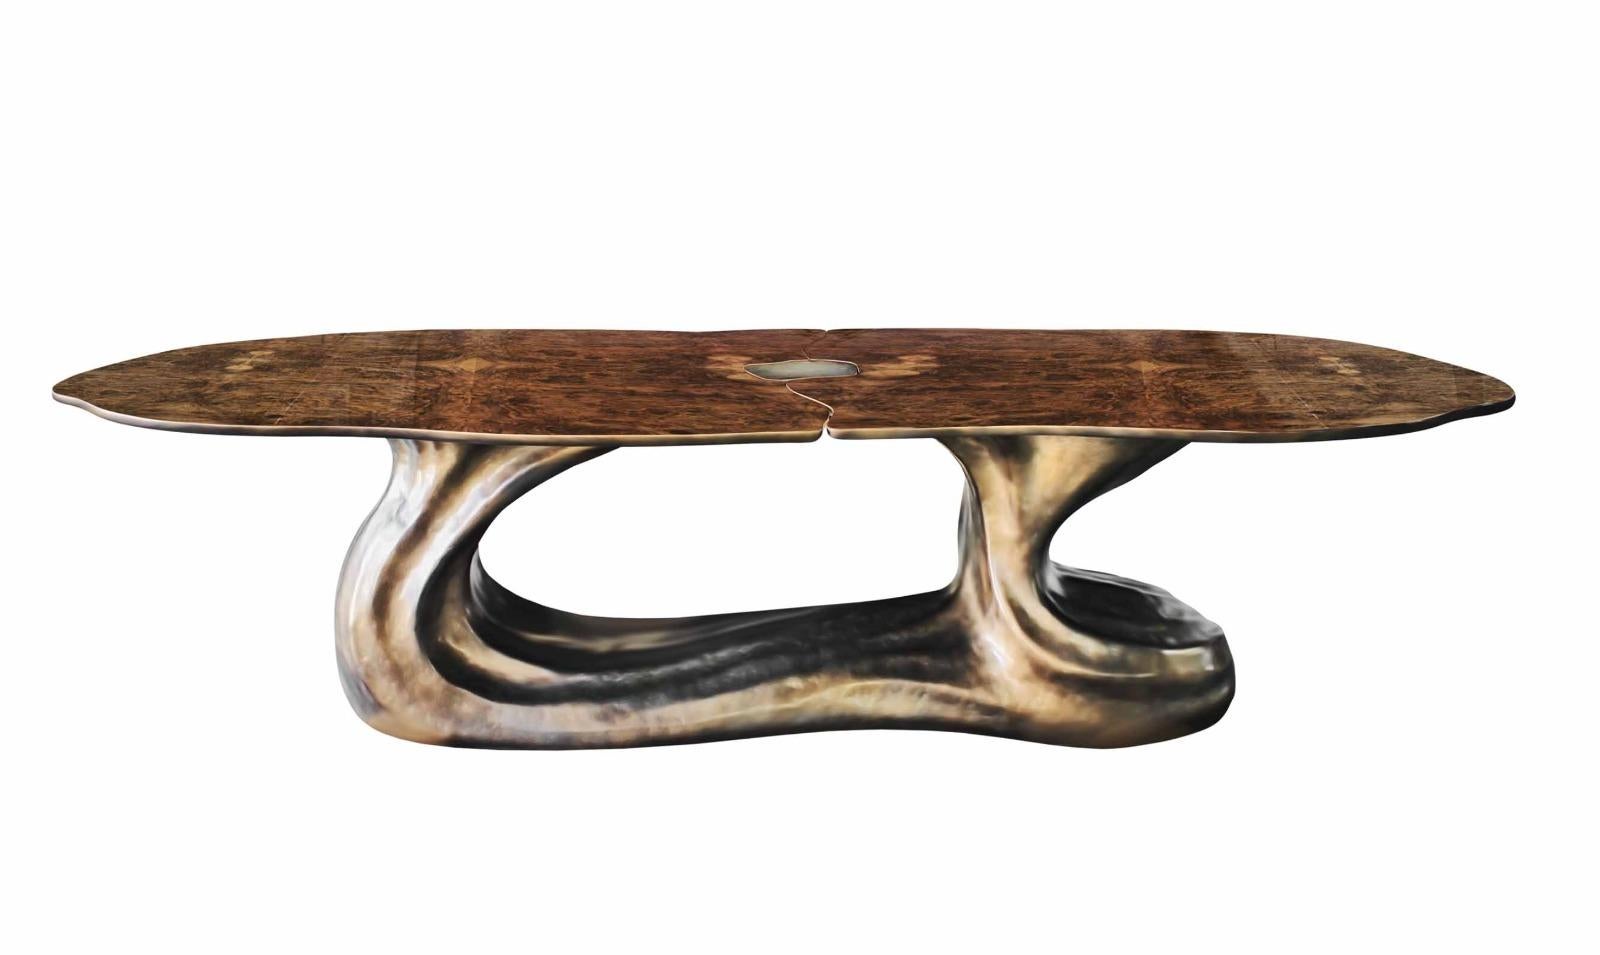 Oval dining table.

General information.

Dimensions (cm): 330 x 130 x 75
Dimensions (in): 129.9 x 51.2 x 29.5
Weight (kg): 170
Weight (lbs): 374.8
Seats: 10 to 12

Materials and colors

Top: Walnut root veneer with high gloss